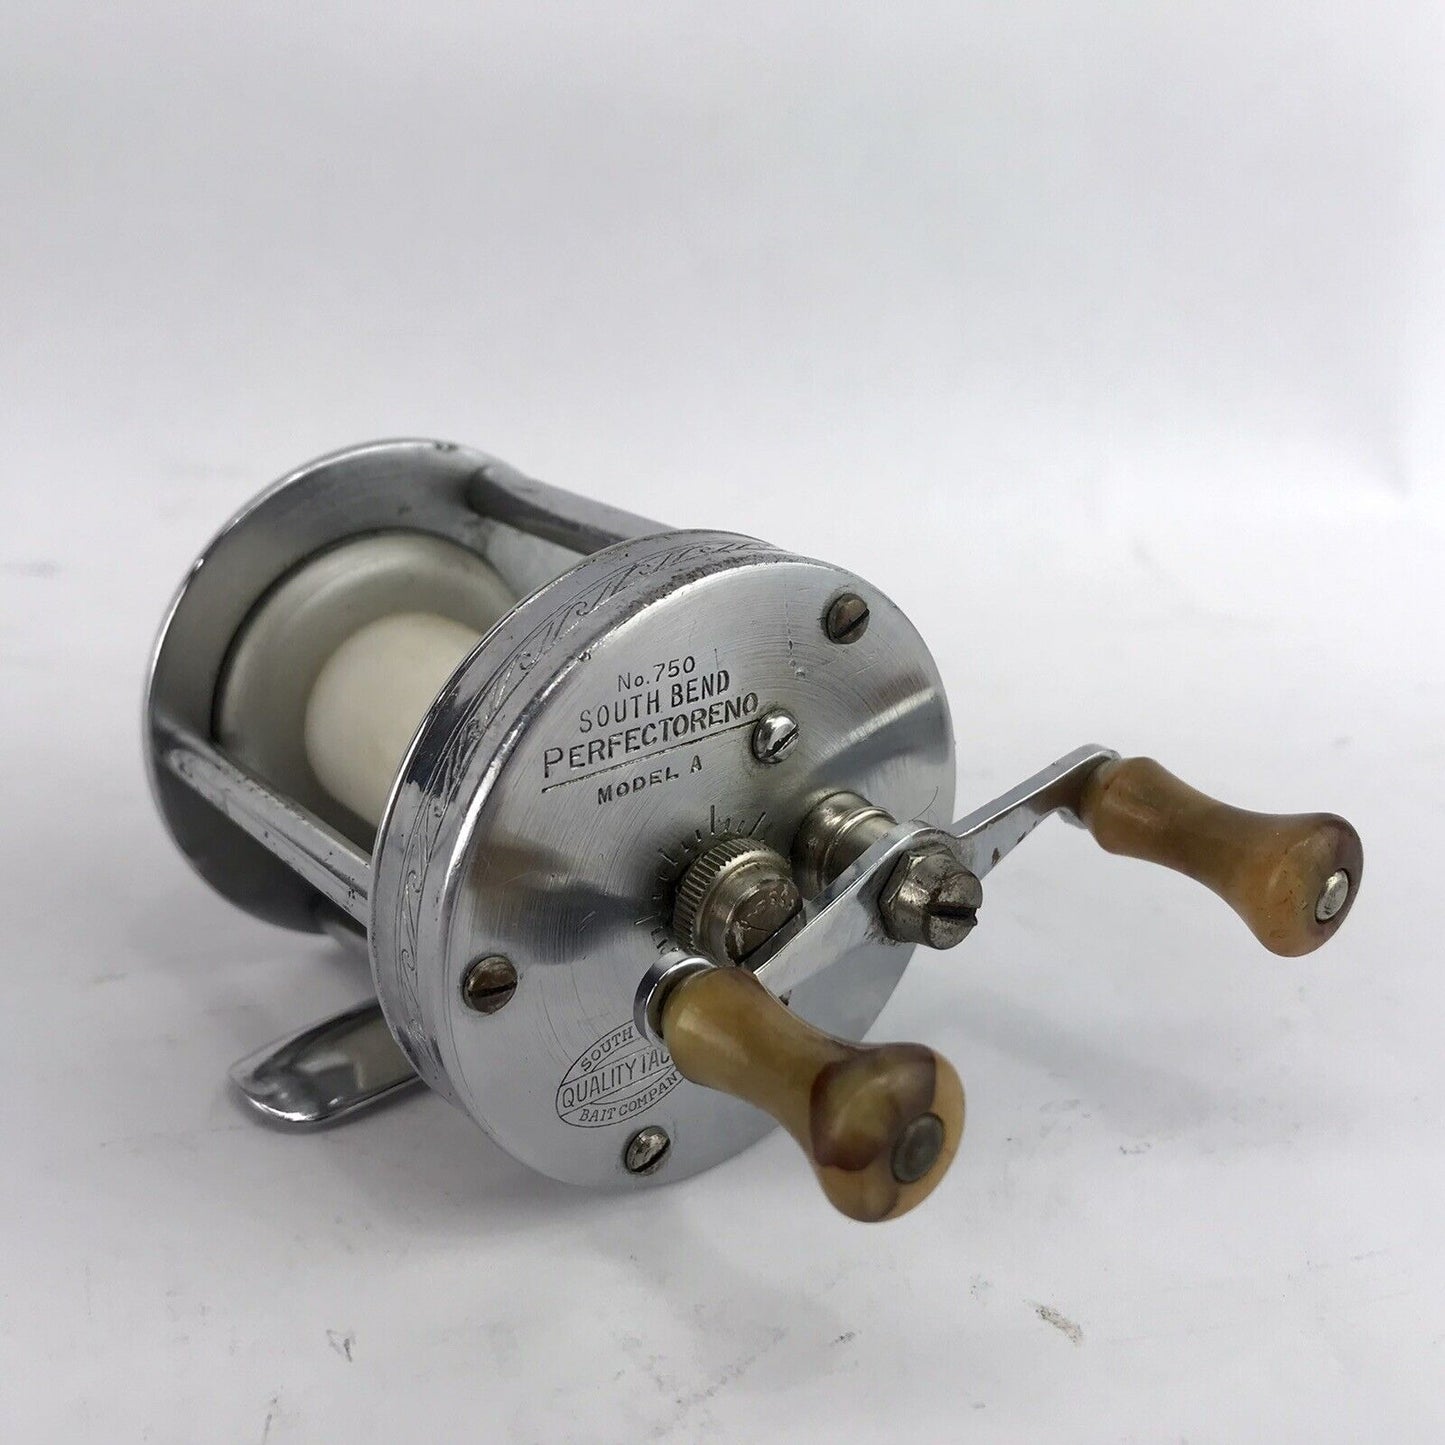 South Bend Perfectoreno Model A Fishing Reel WORKS GREAT